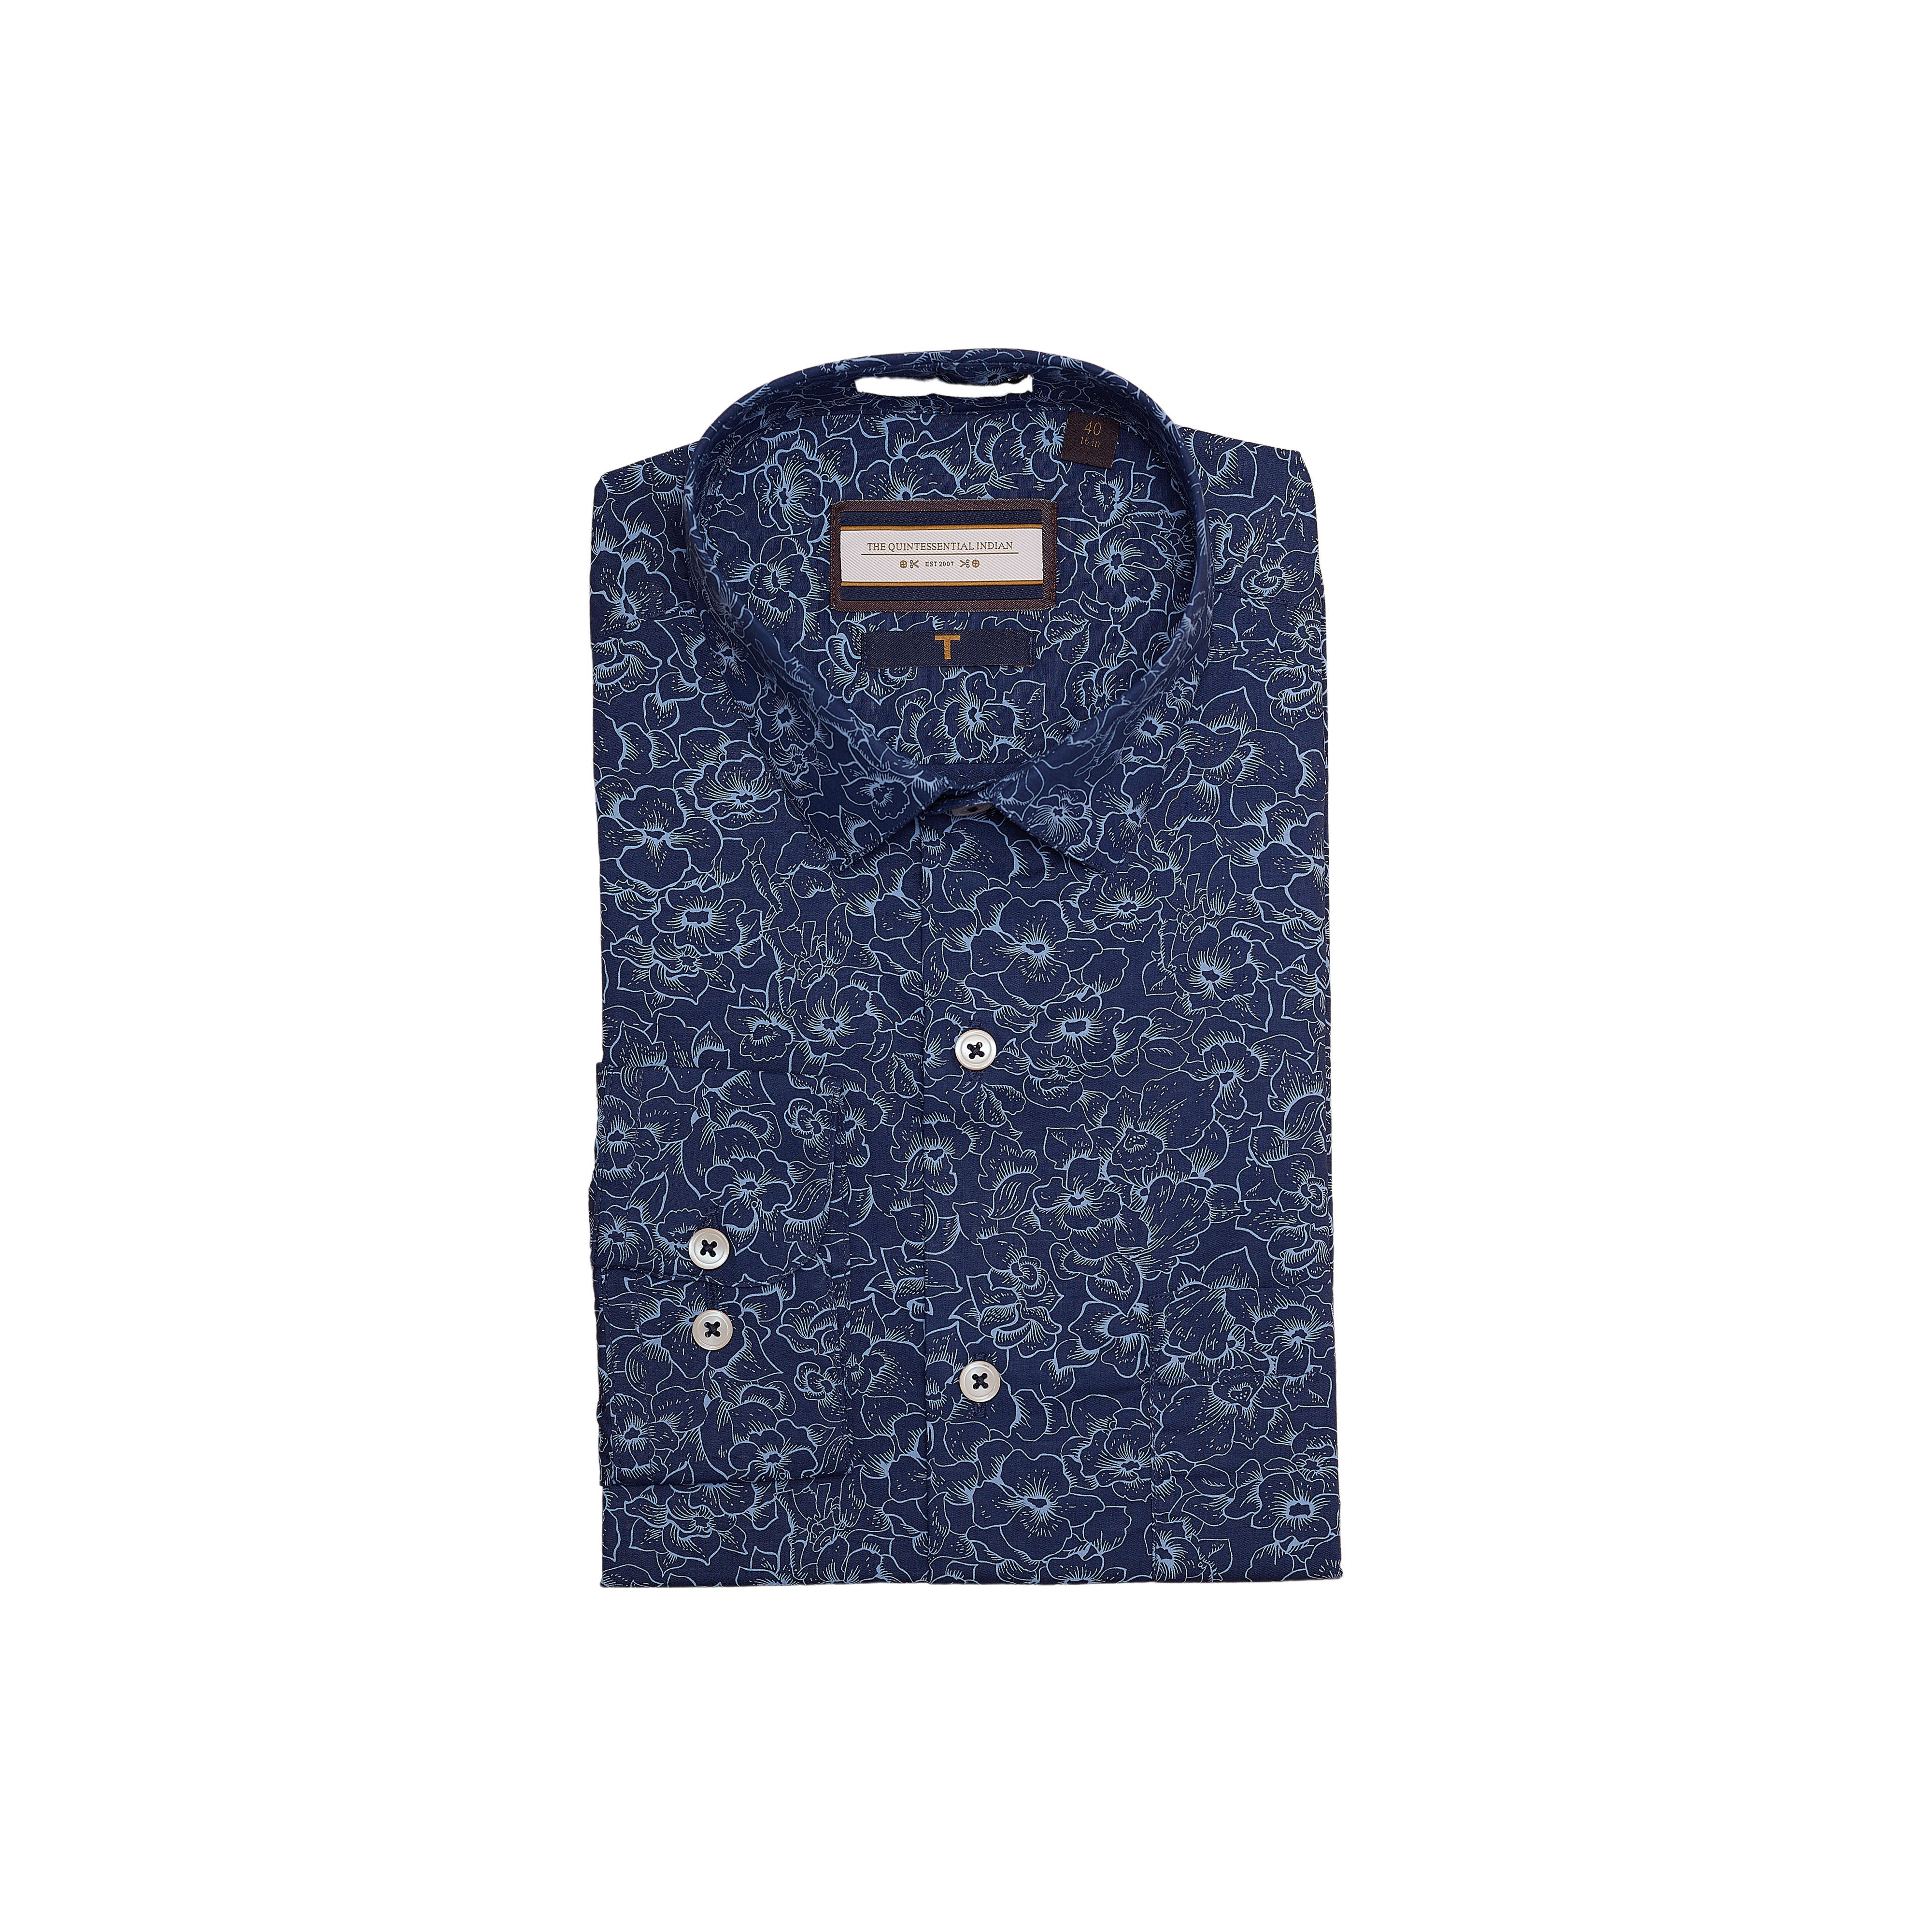 Superfine Cotton, Blue Floral Printed Full-sleeved shirt